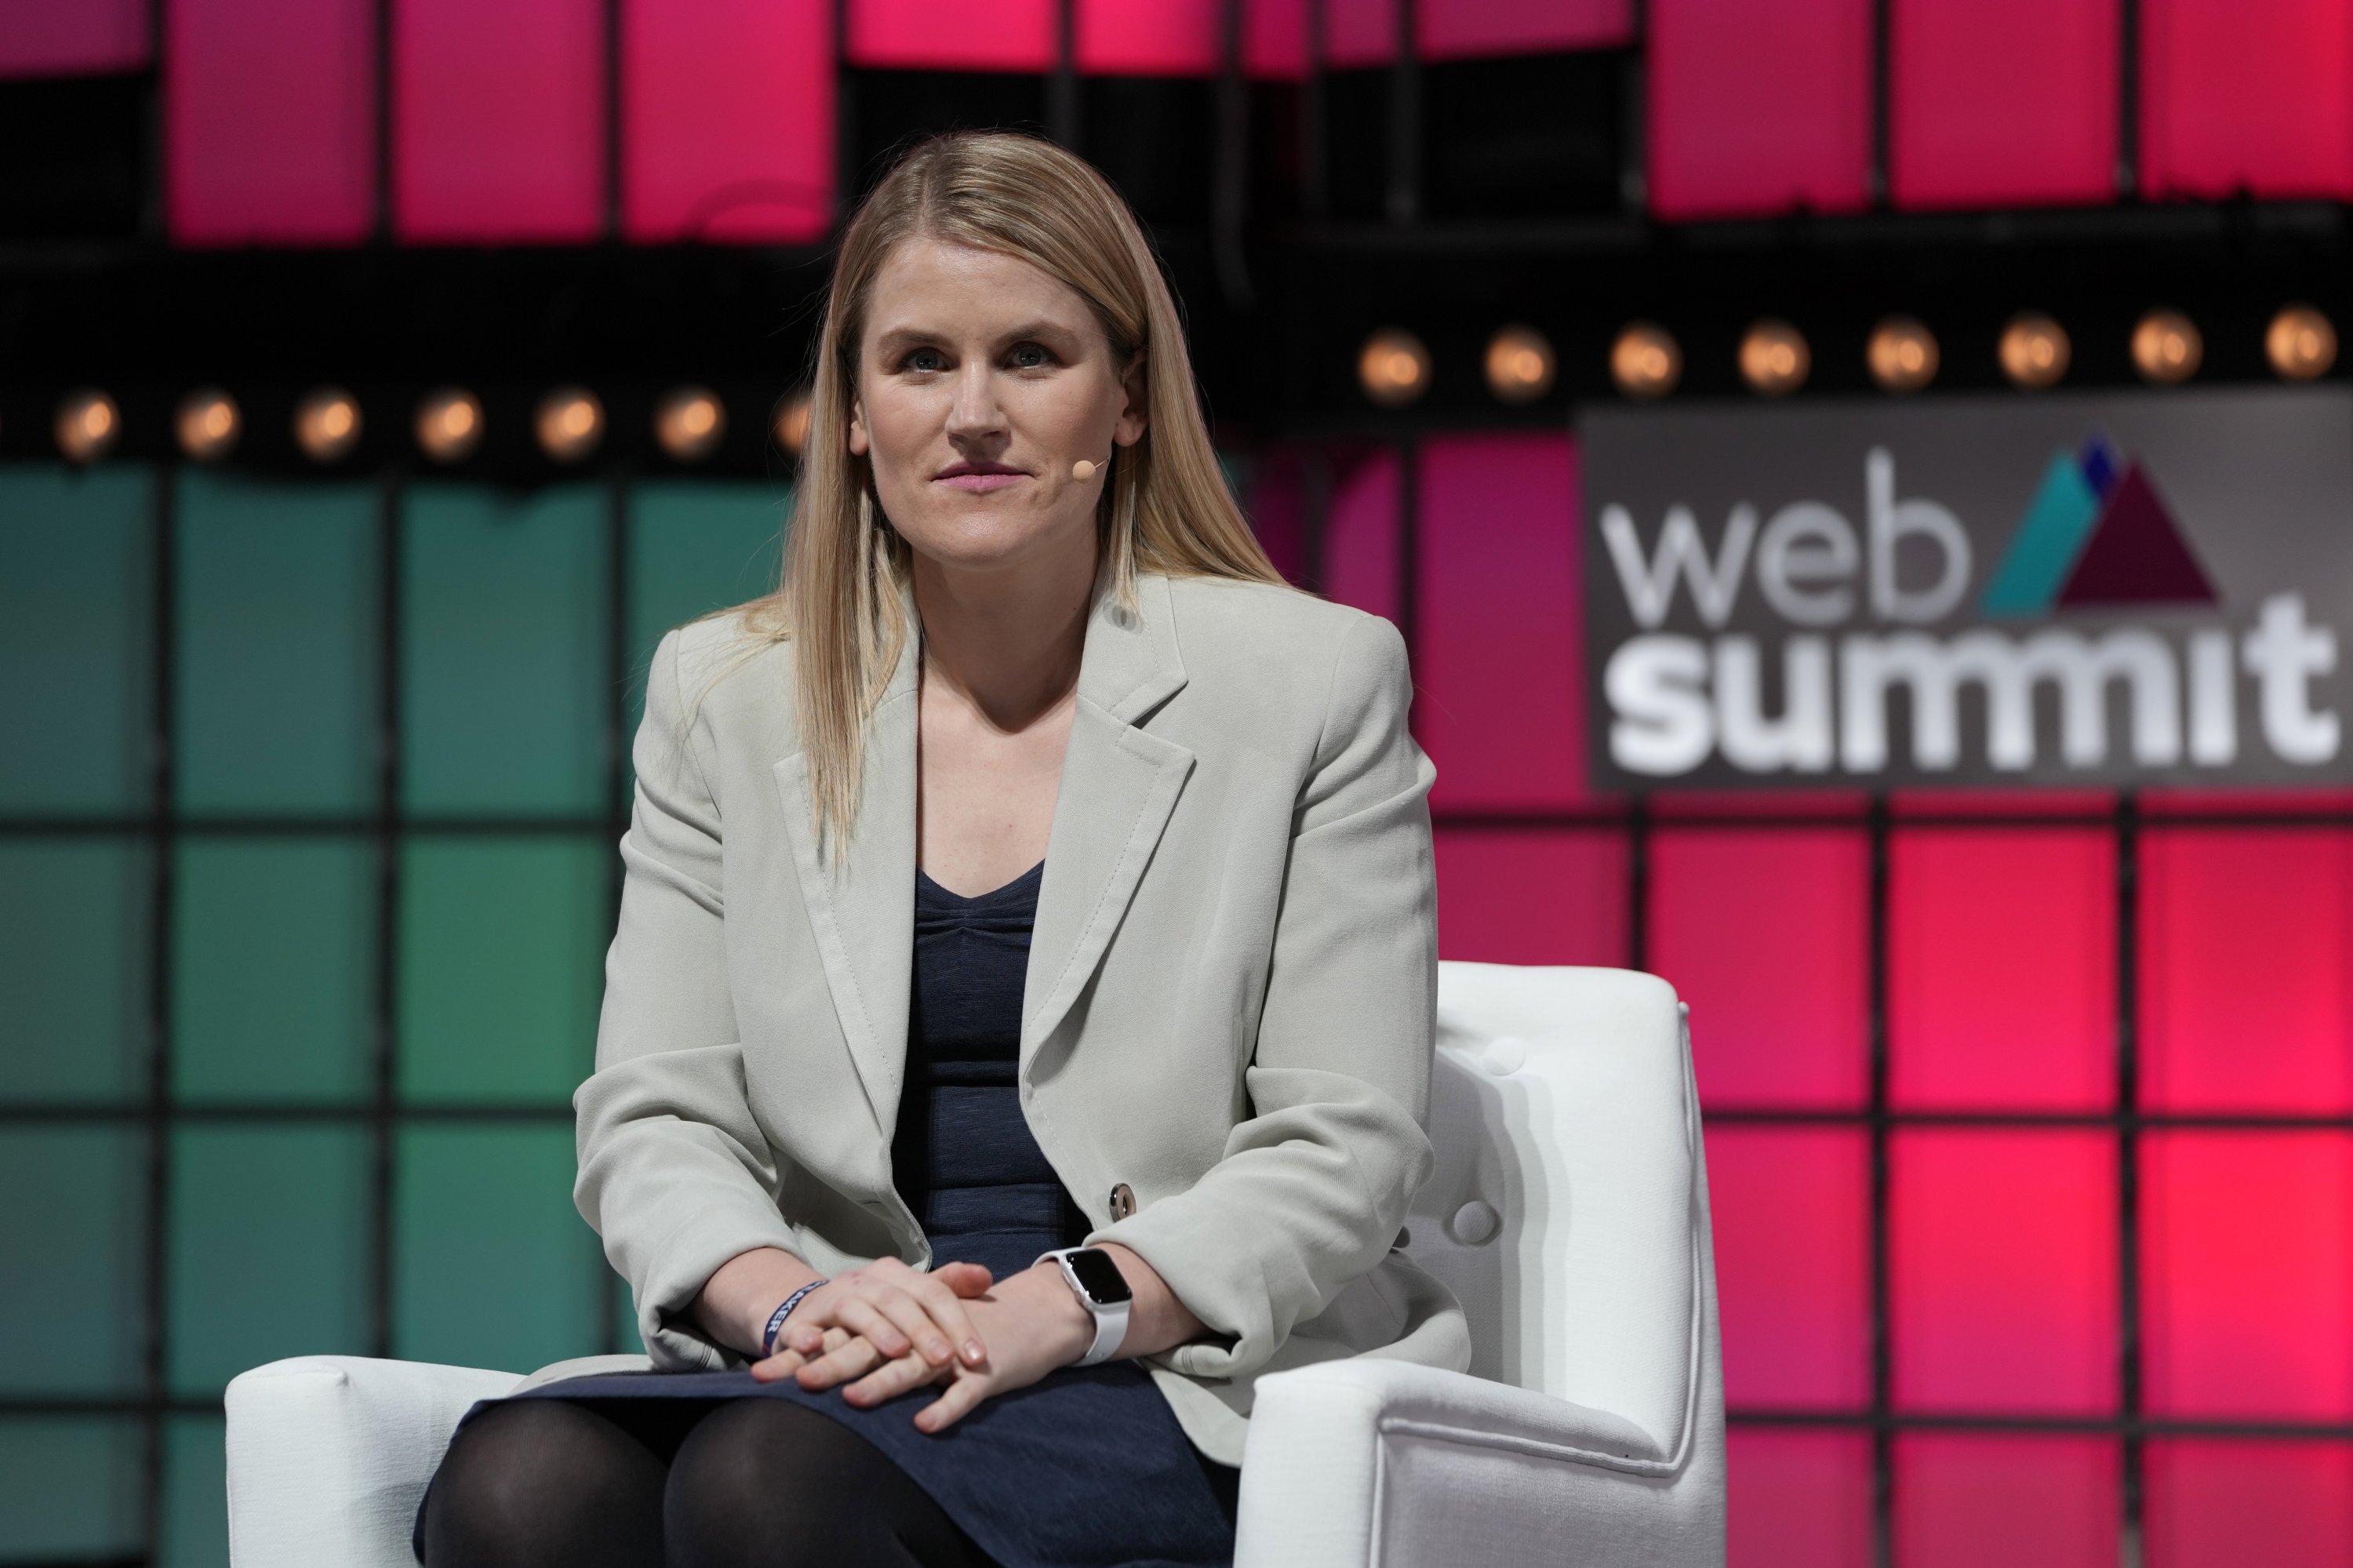 Facebook whistleblower Frances Haugen sits for an interview at center stage during the opening of the Web Summit technology conference in Lisbon, Portugal, Nov. 1, 2021. (AP Photo)